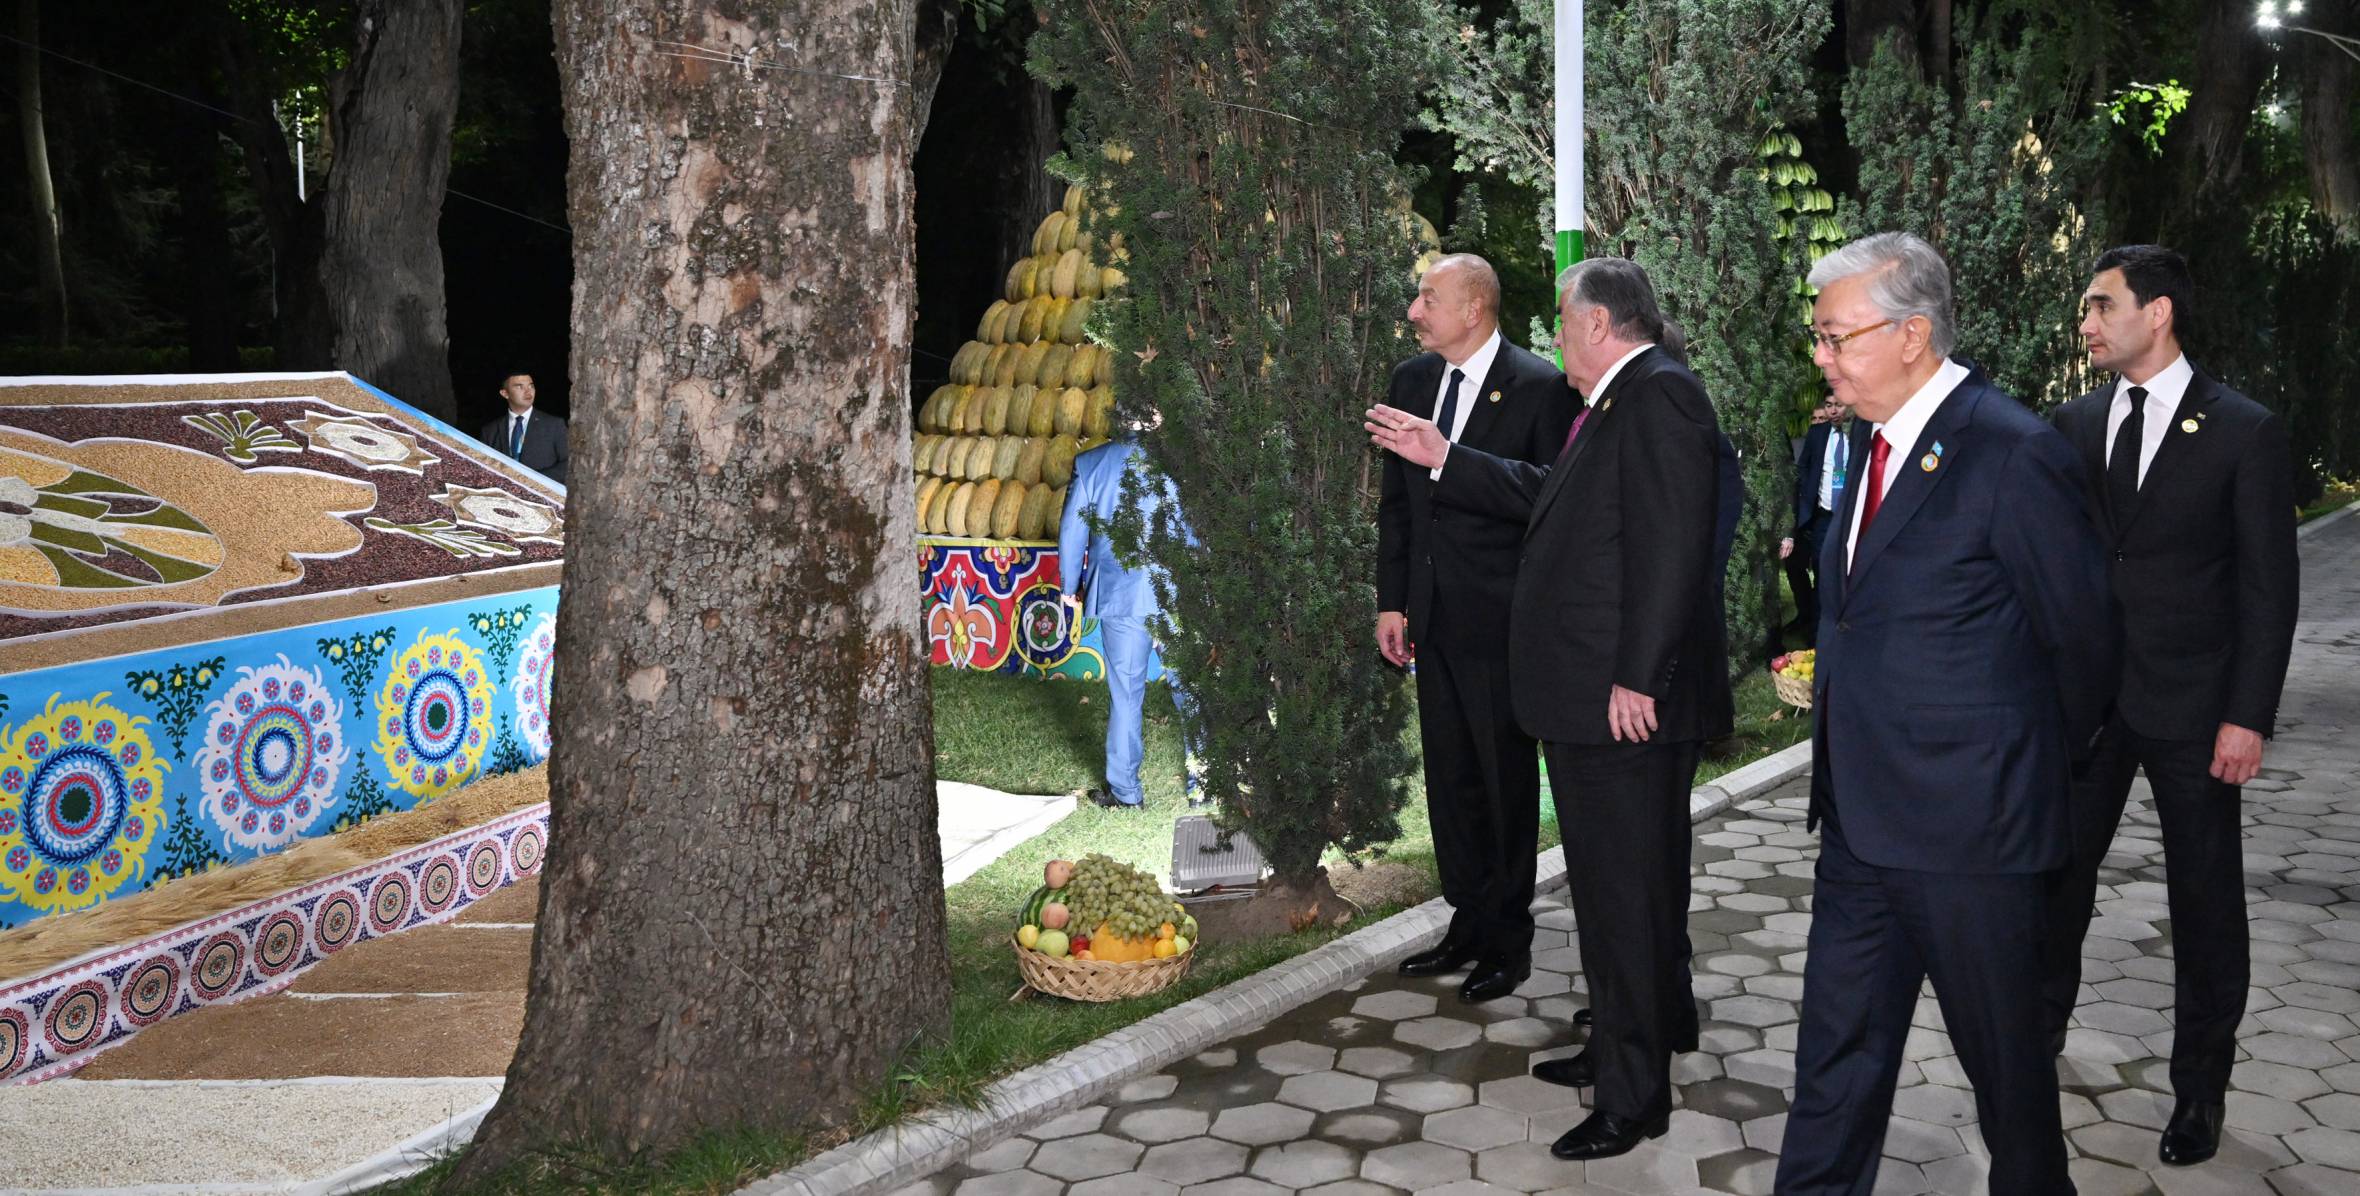 Ilham Aliyev participates in official reception in honor of heads of state in Dushanbe